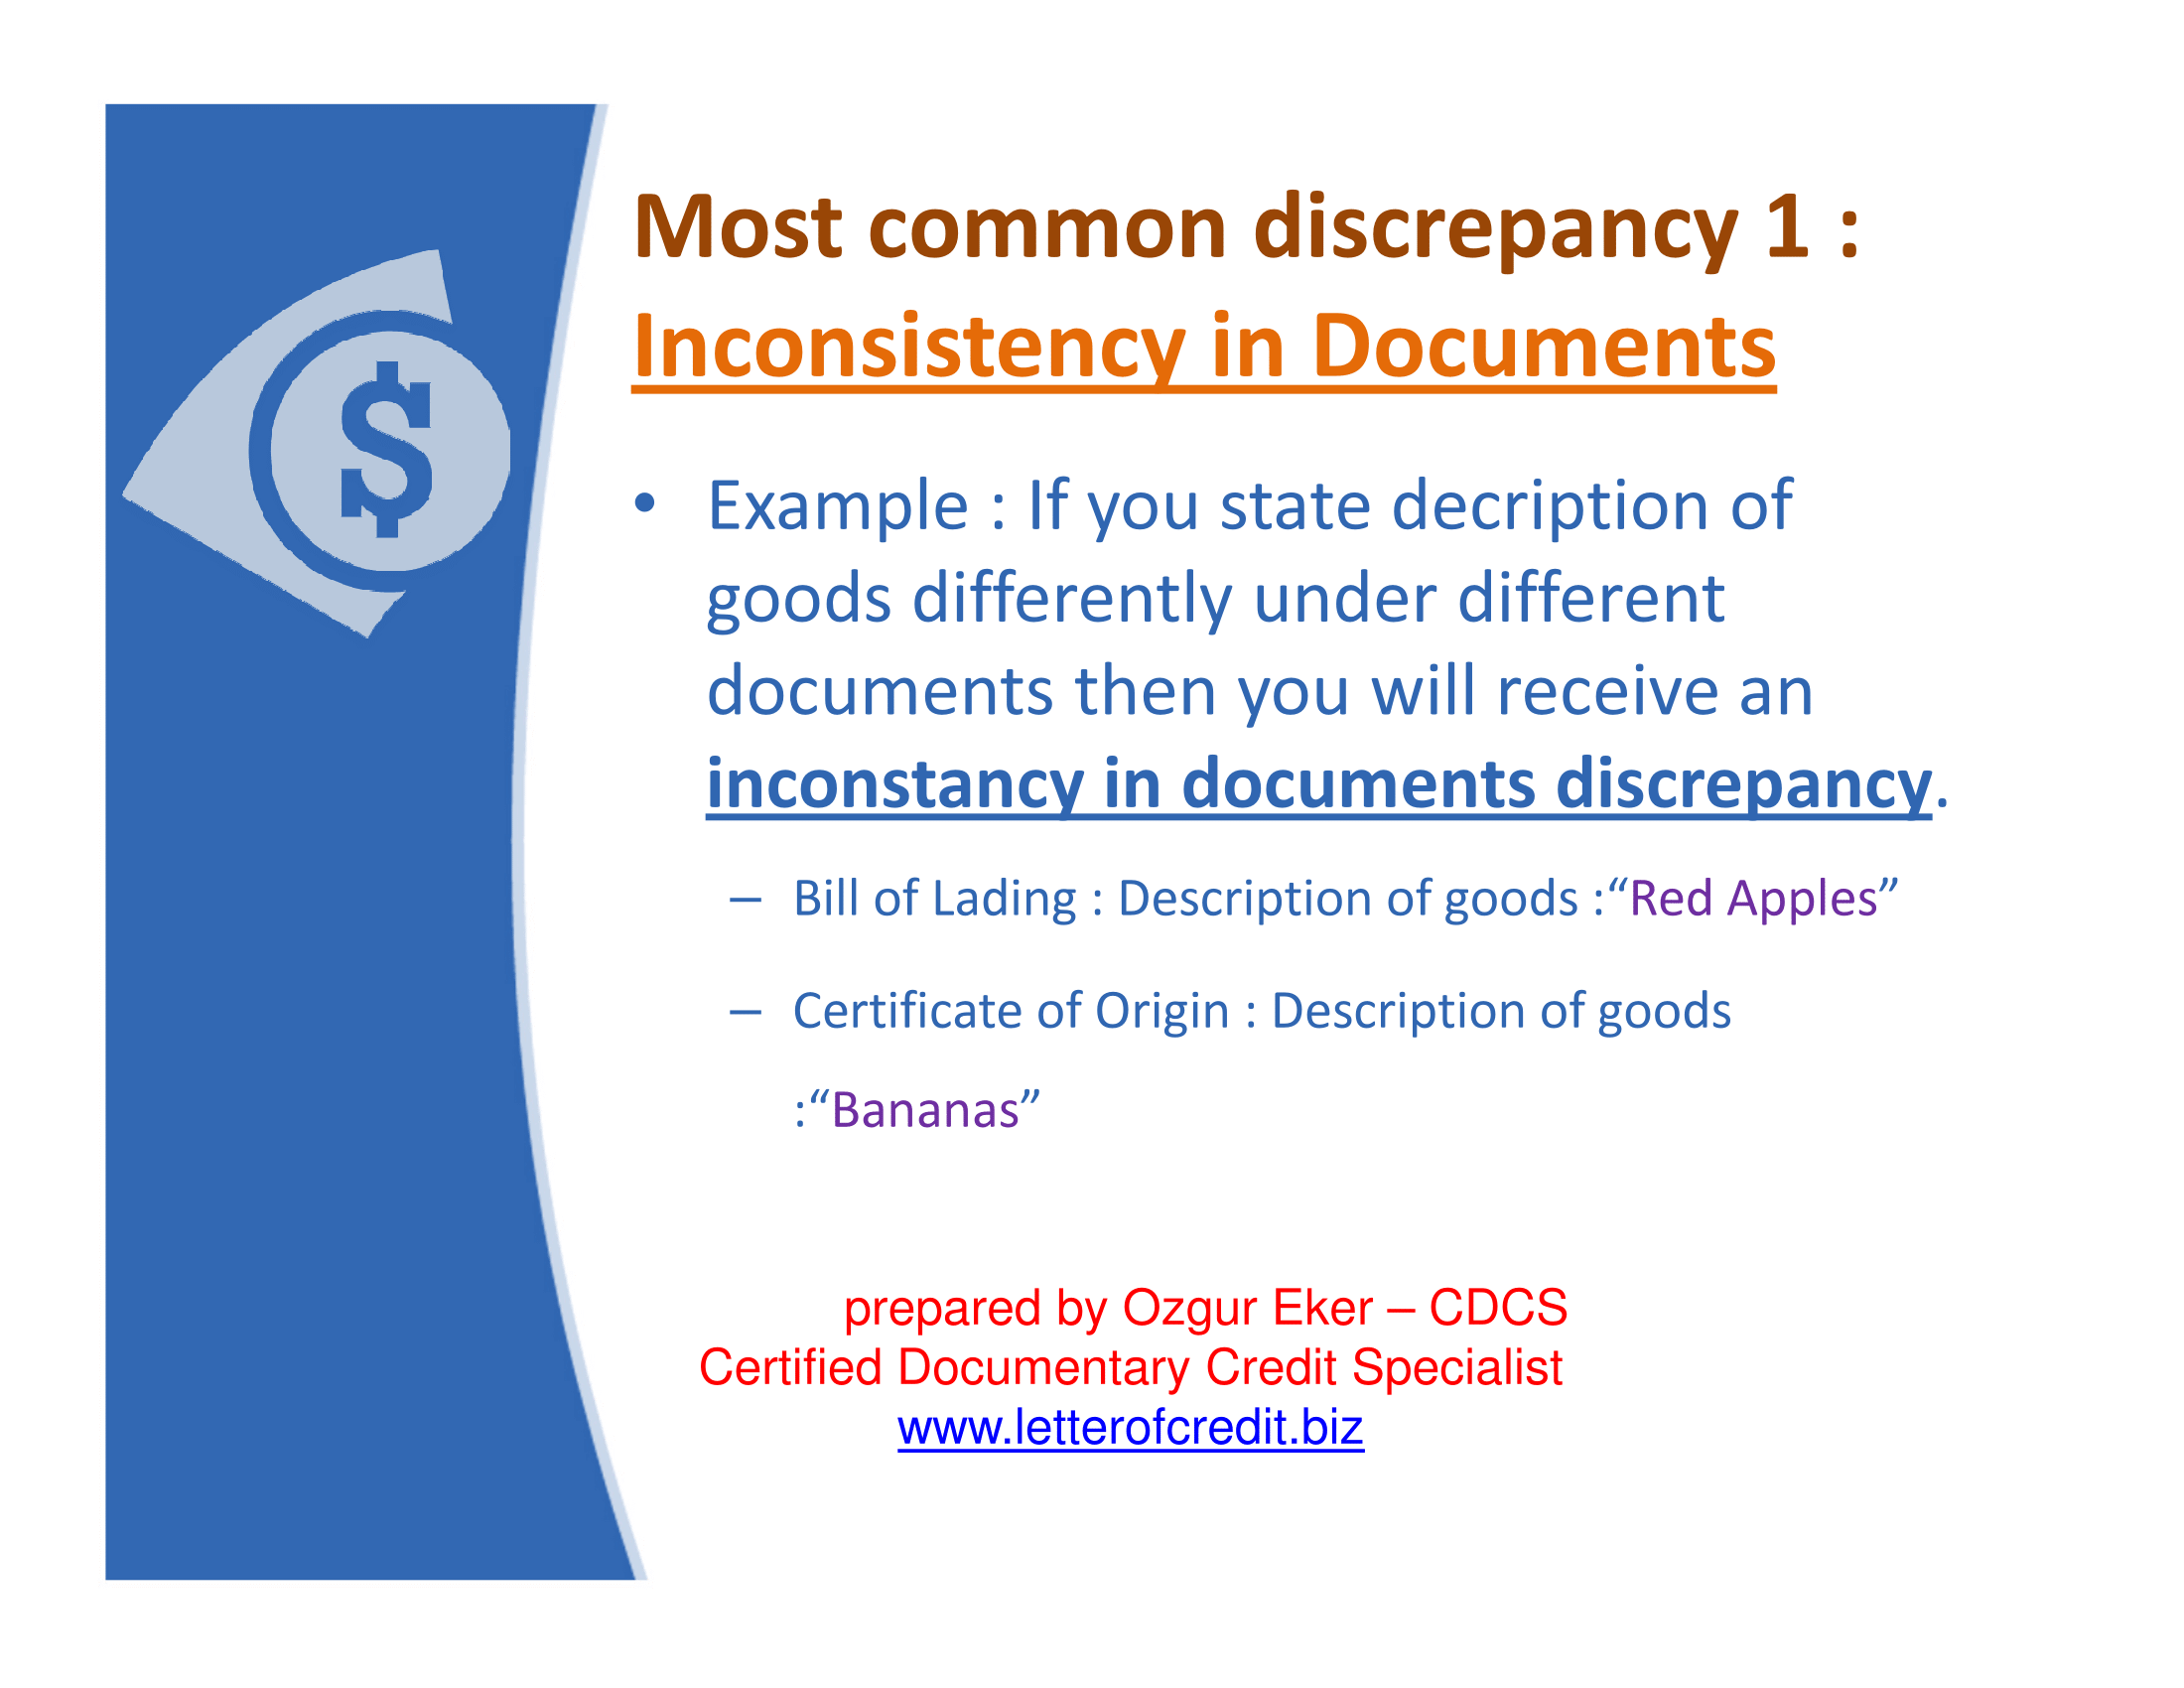 Most common discrepancy 1 : Inconsistency in Documents